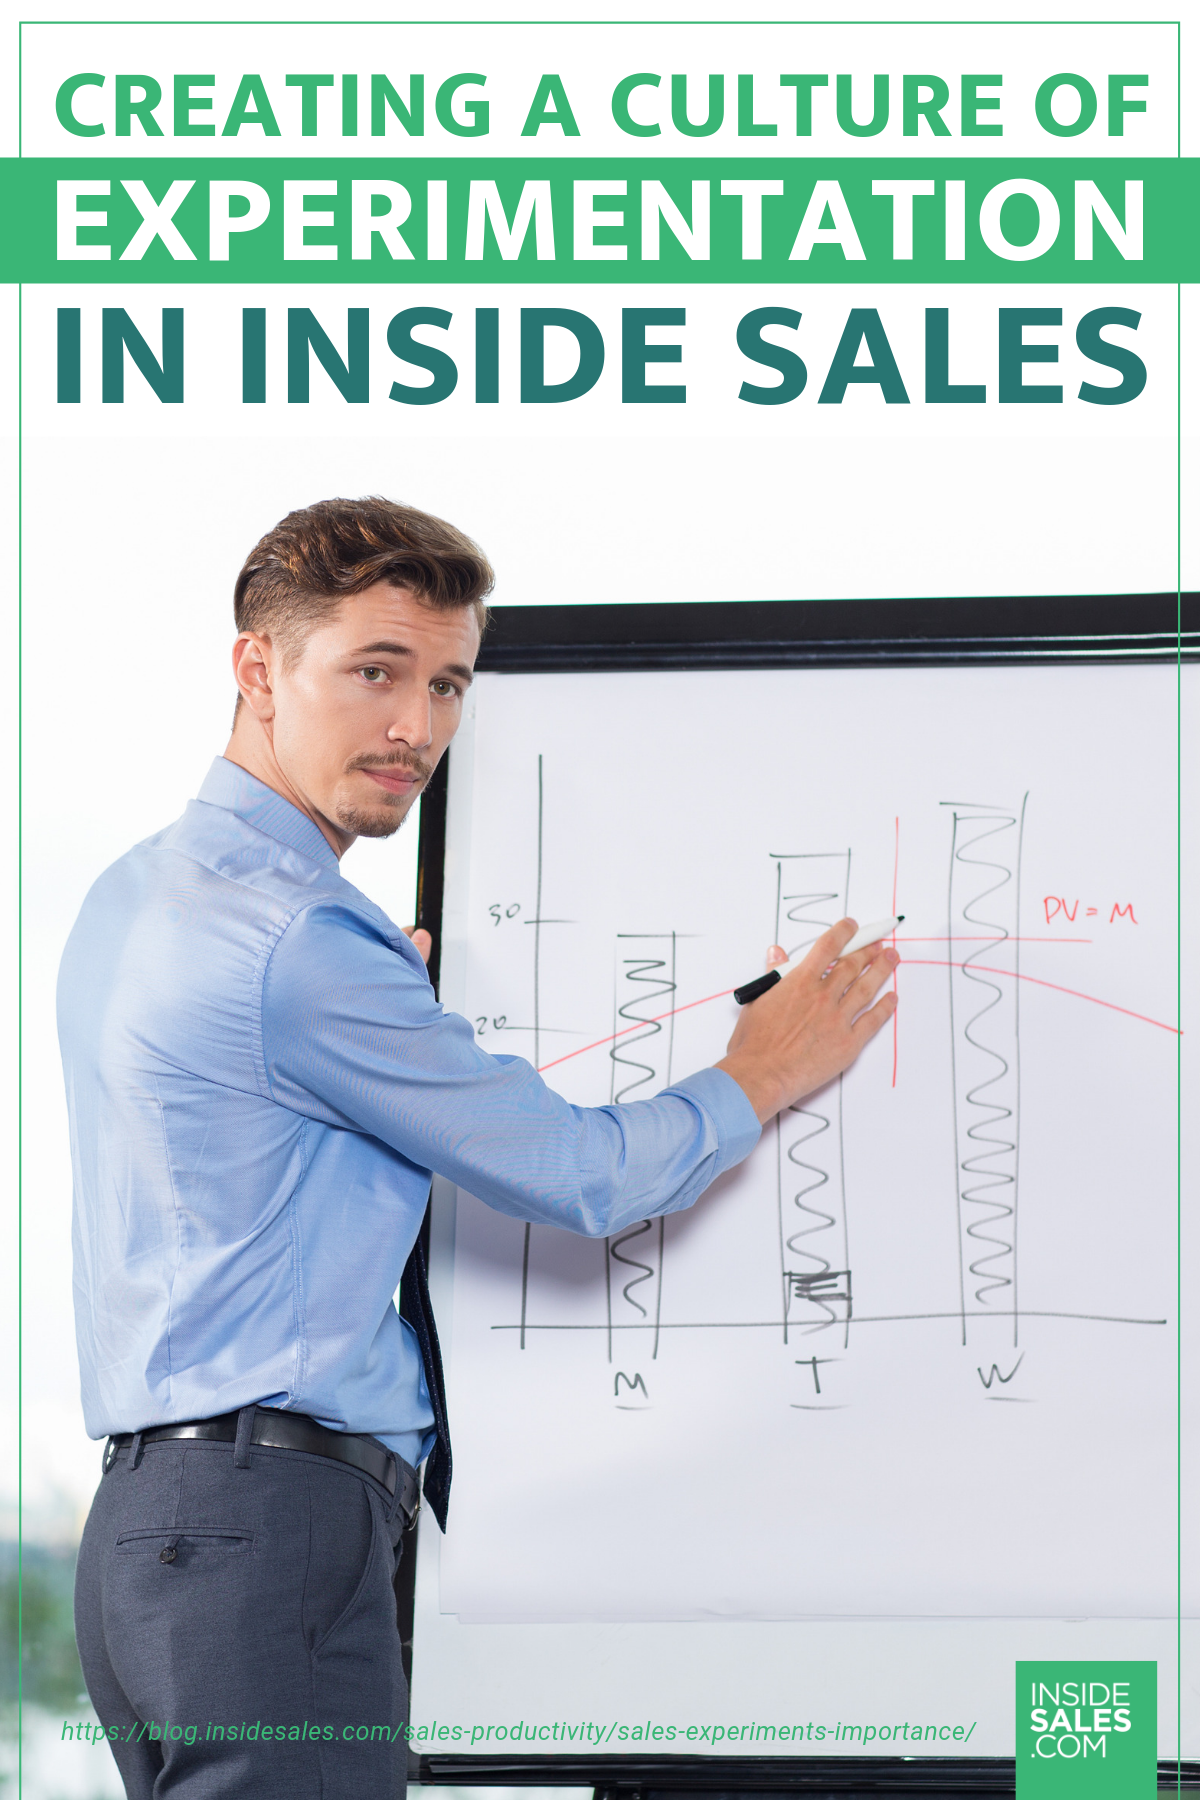 Creating A Culture Of Experimentation In Inside Sales https://www.insidesales.com/blog/sales-productivity/sales-experiments-importance/